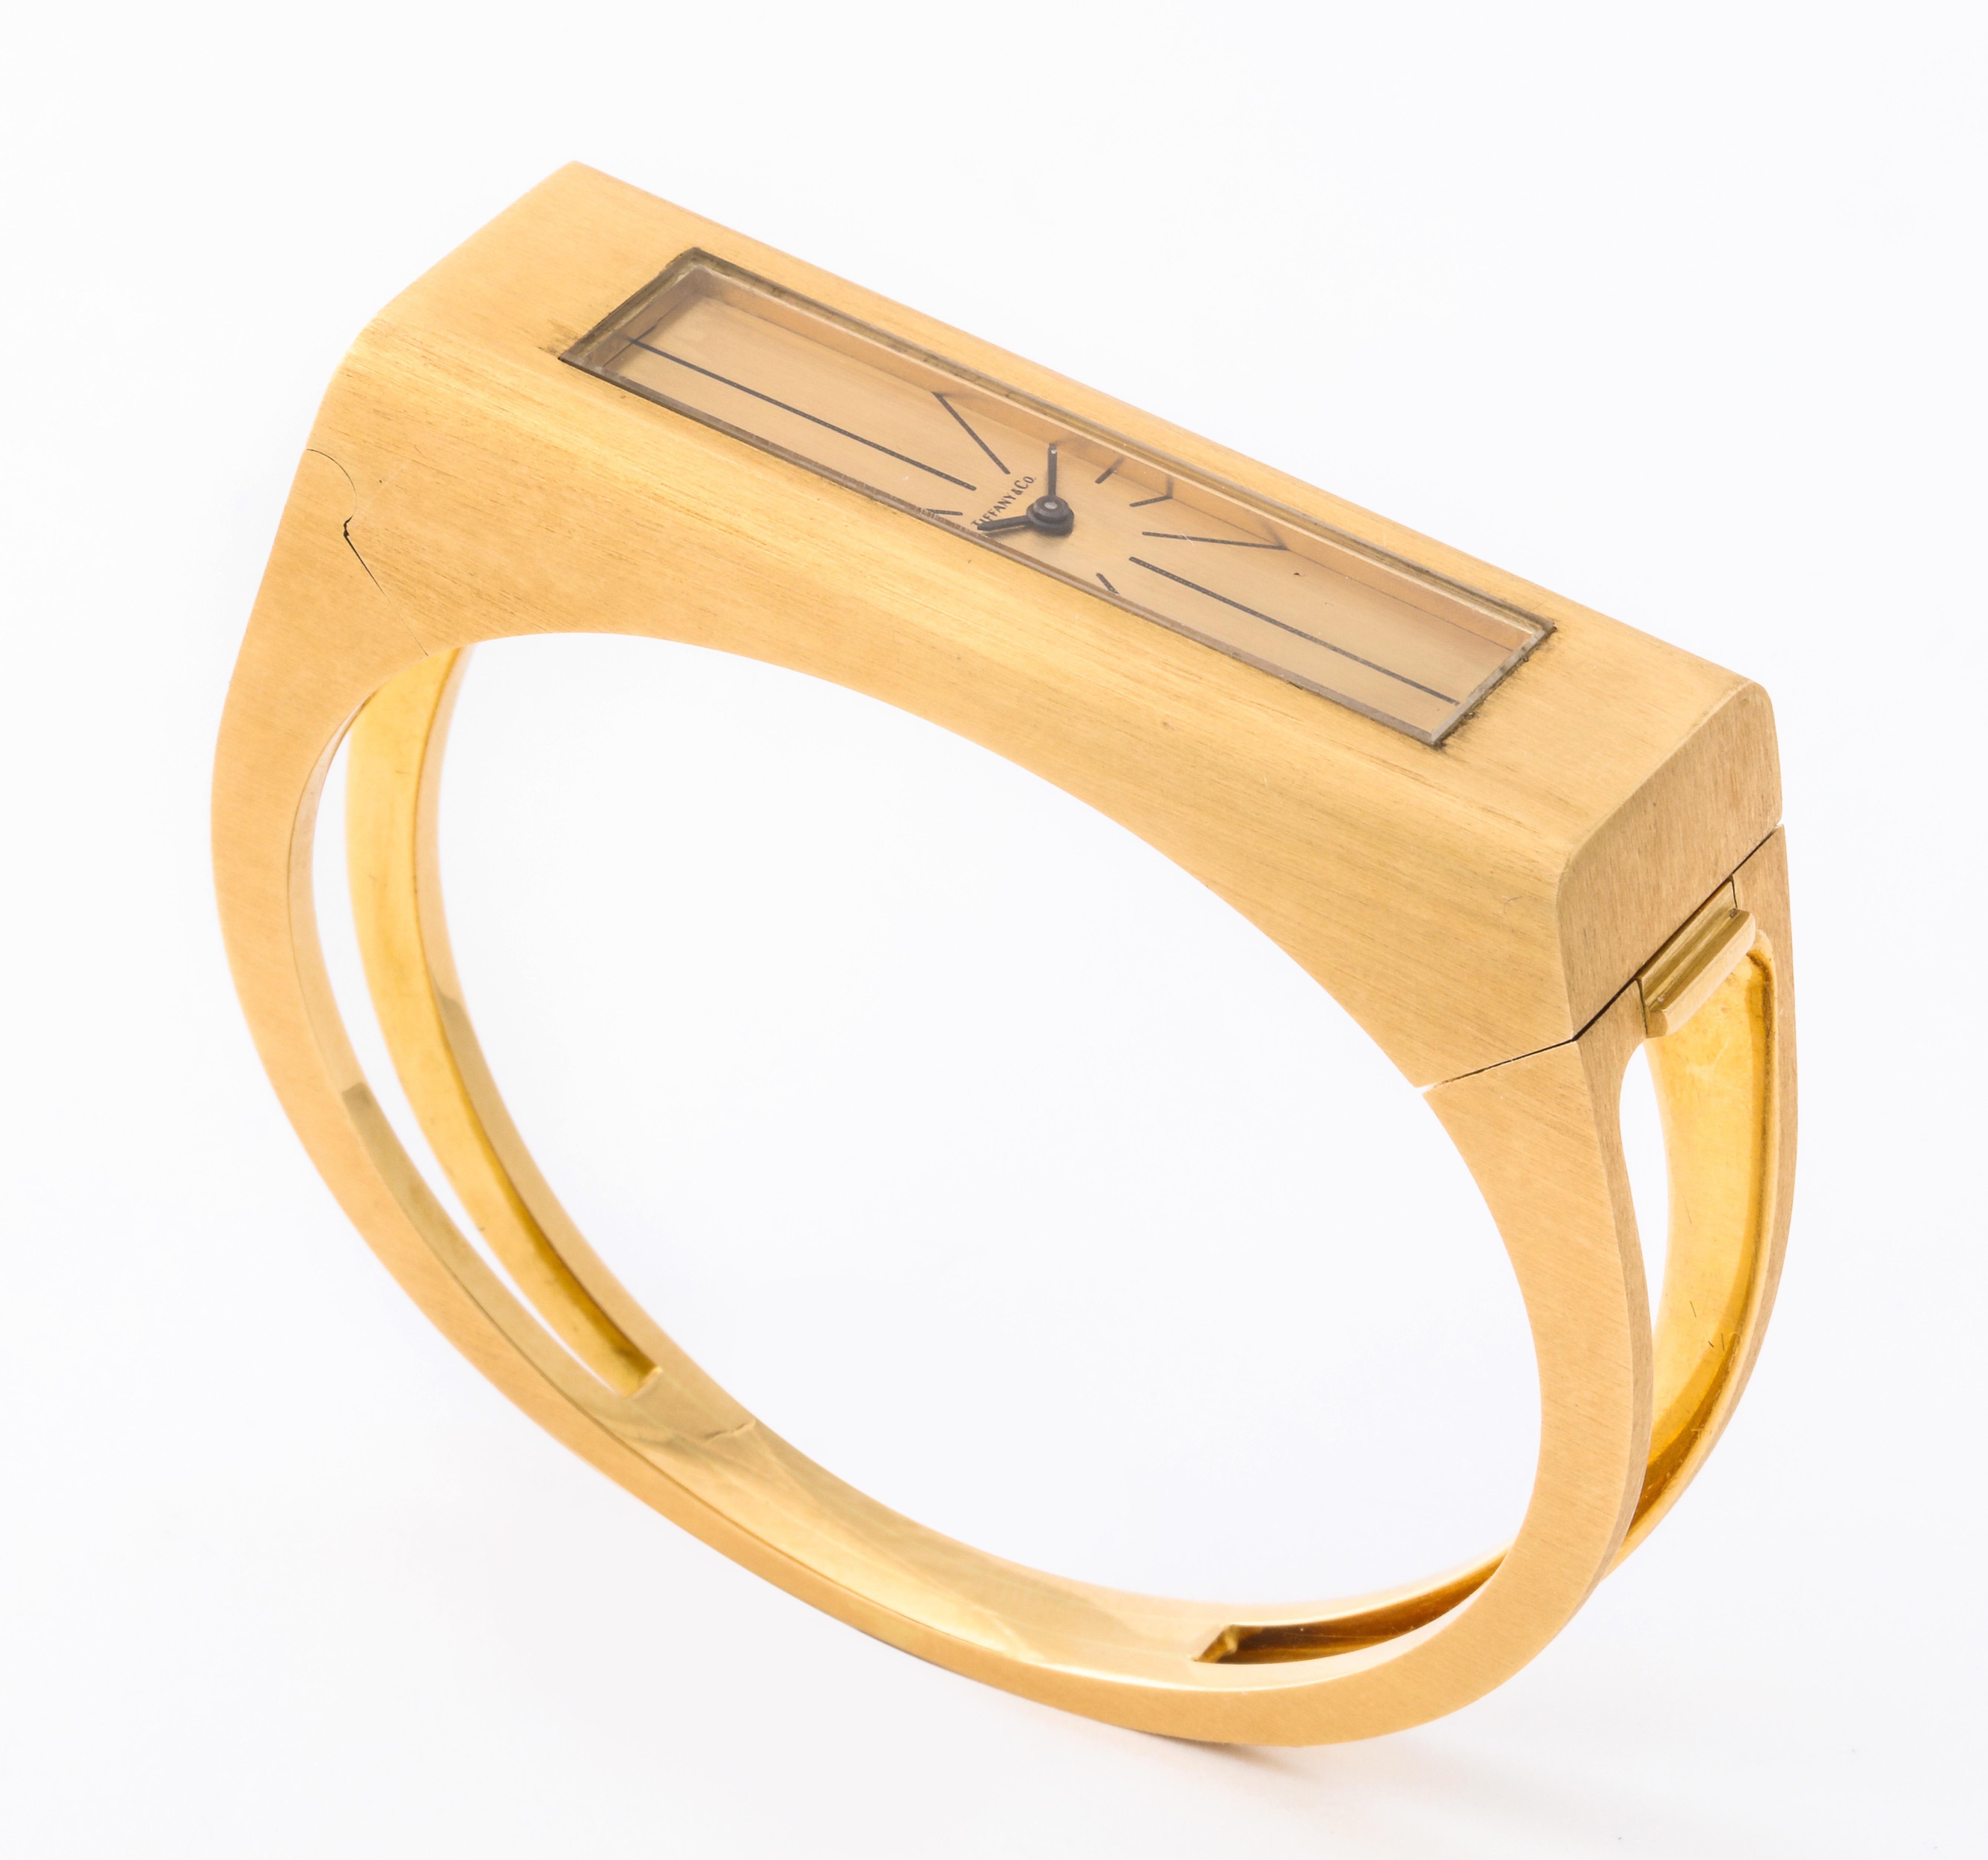 As much a bracelet as it is a watch, this pieces is a great example of the decorative arts of 1970's.  The elongated (2 inches long by 2/3 of an inch wide) watch case blends naturally into the curved bracelet.  Made in France and with a movement by